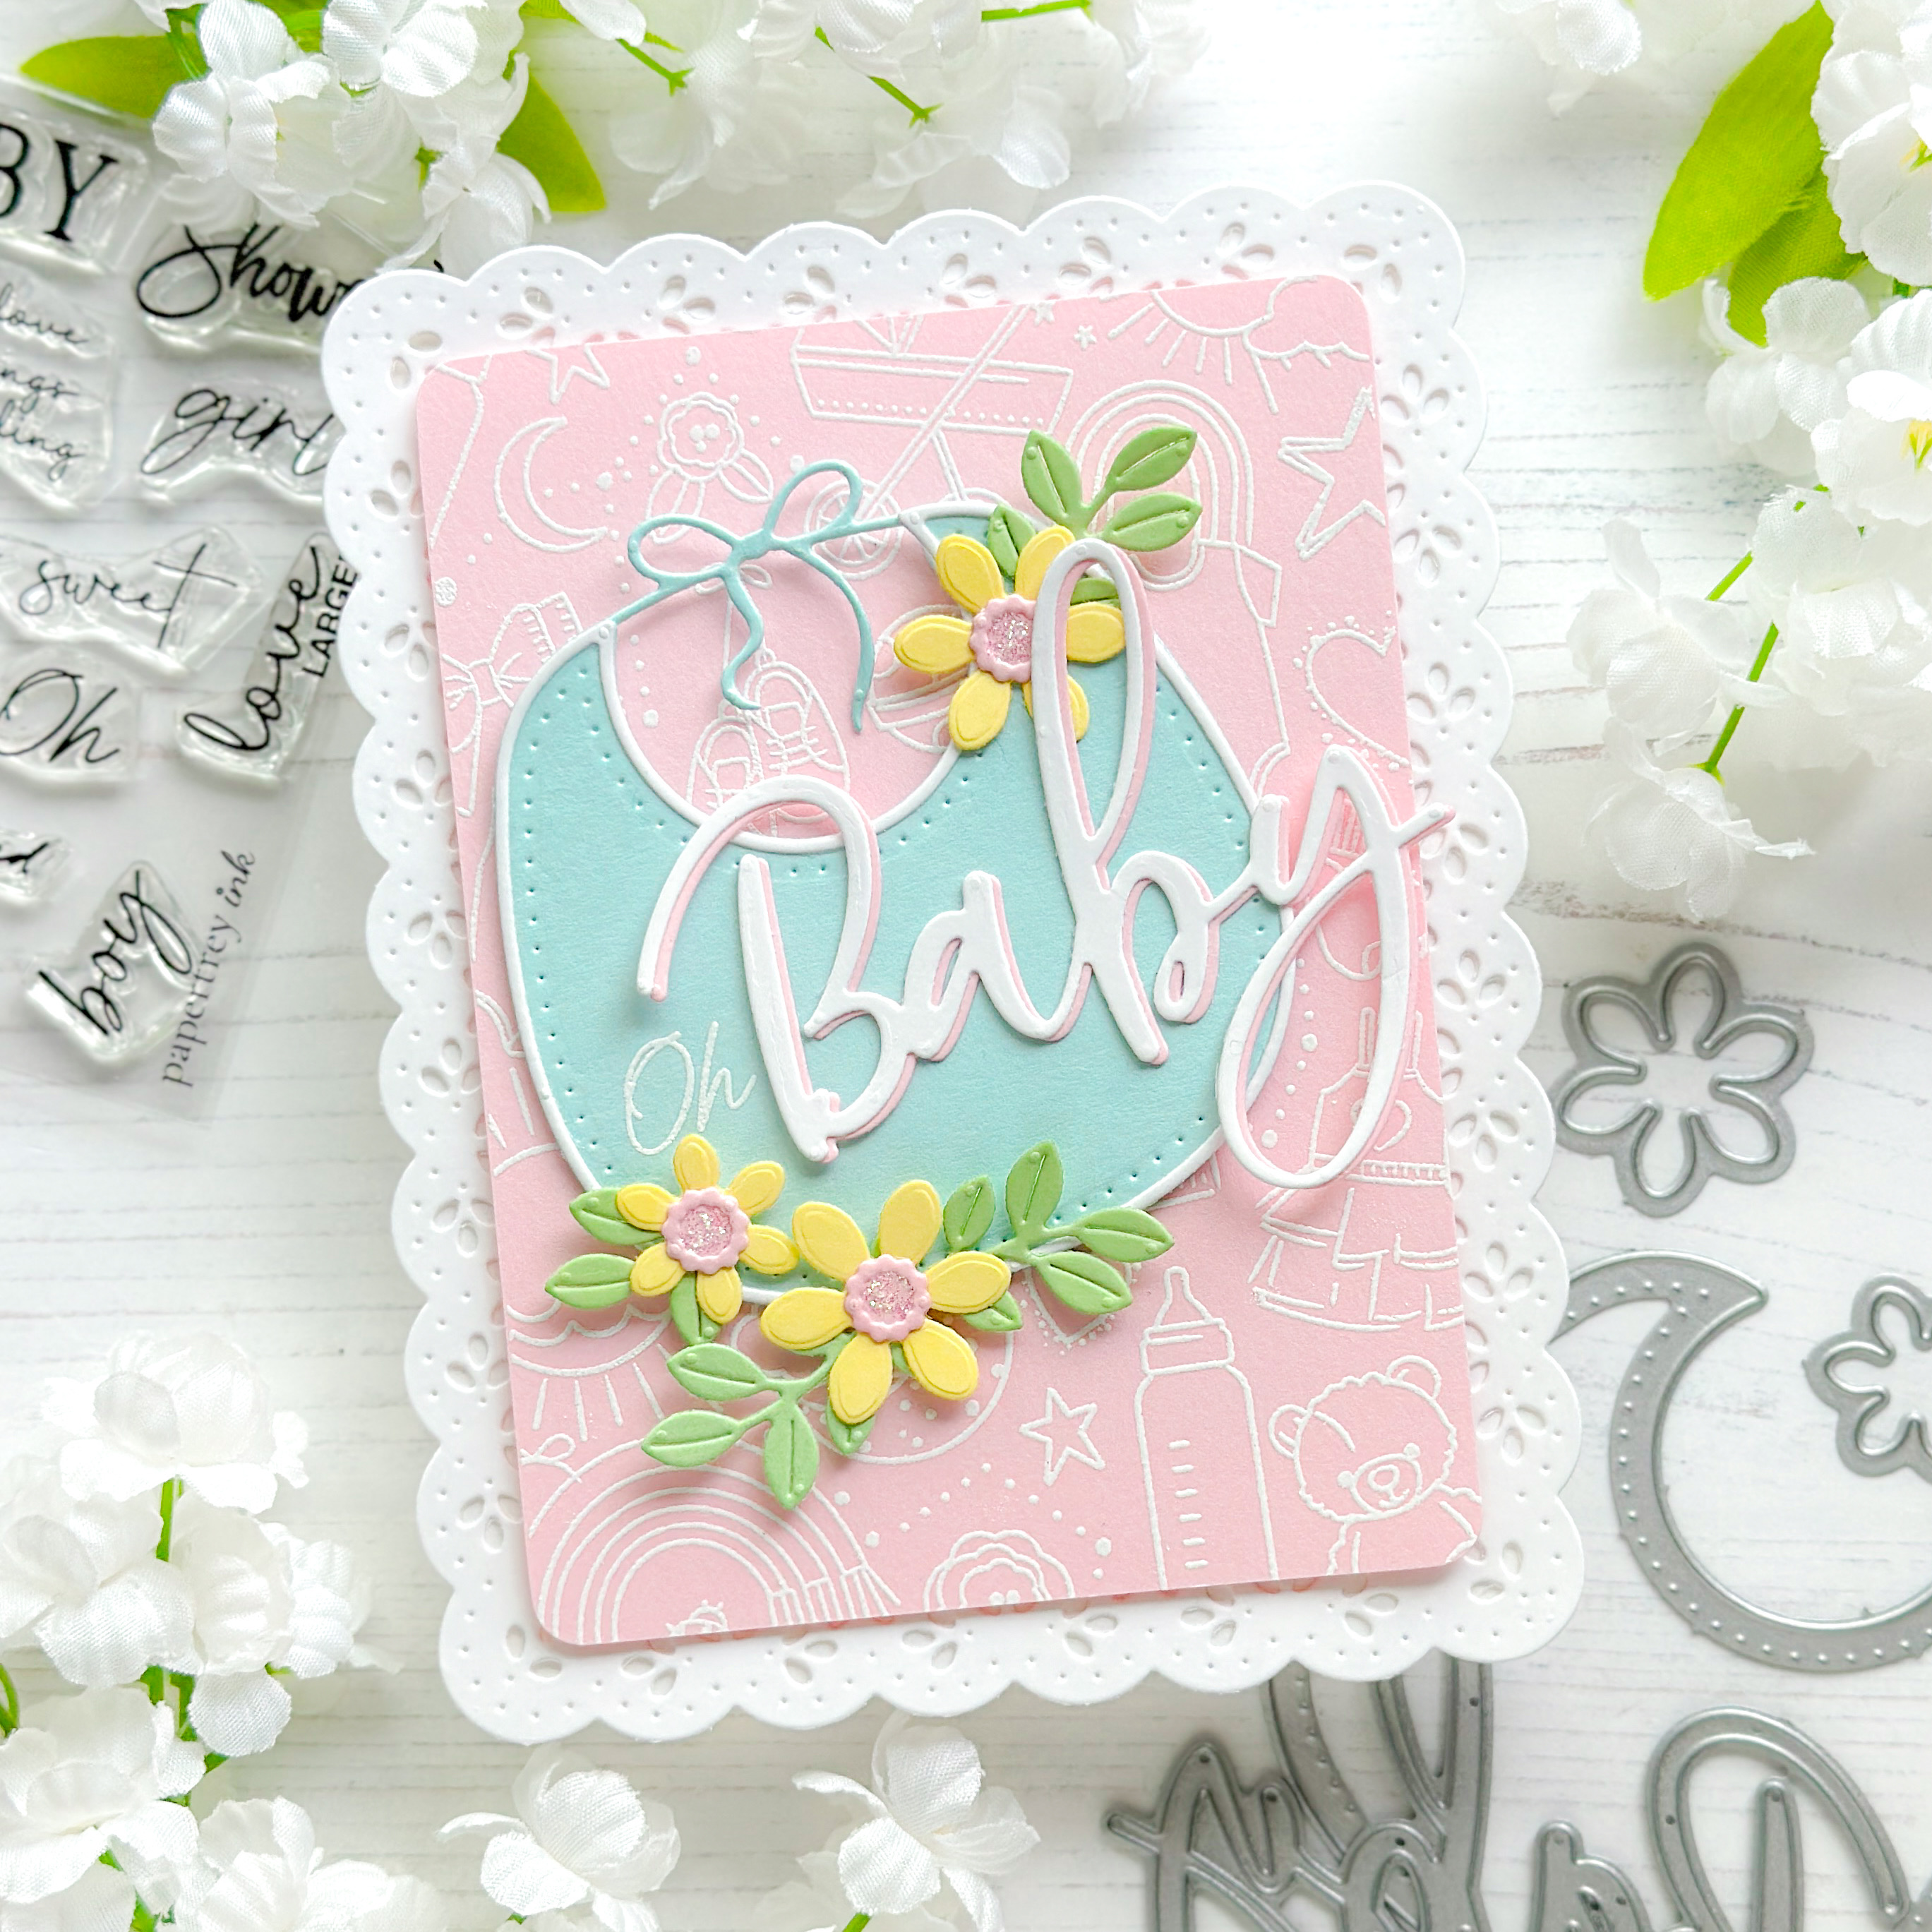 Larger than Life: Baby Sentiments Mini Stamp Set